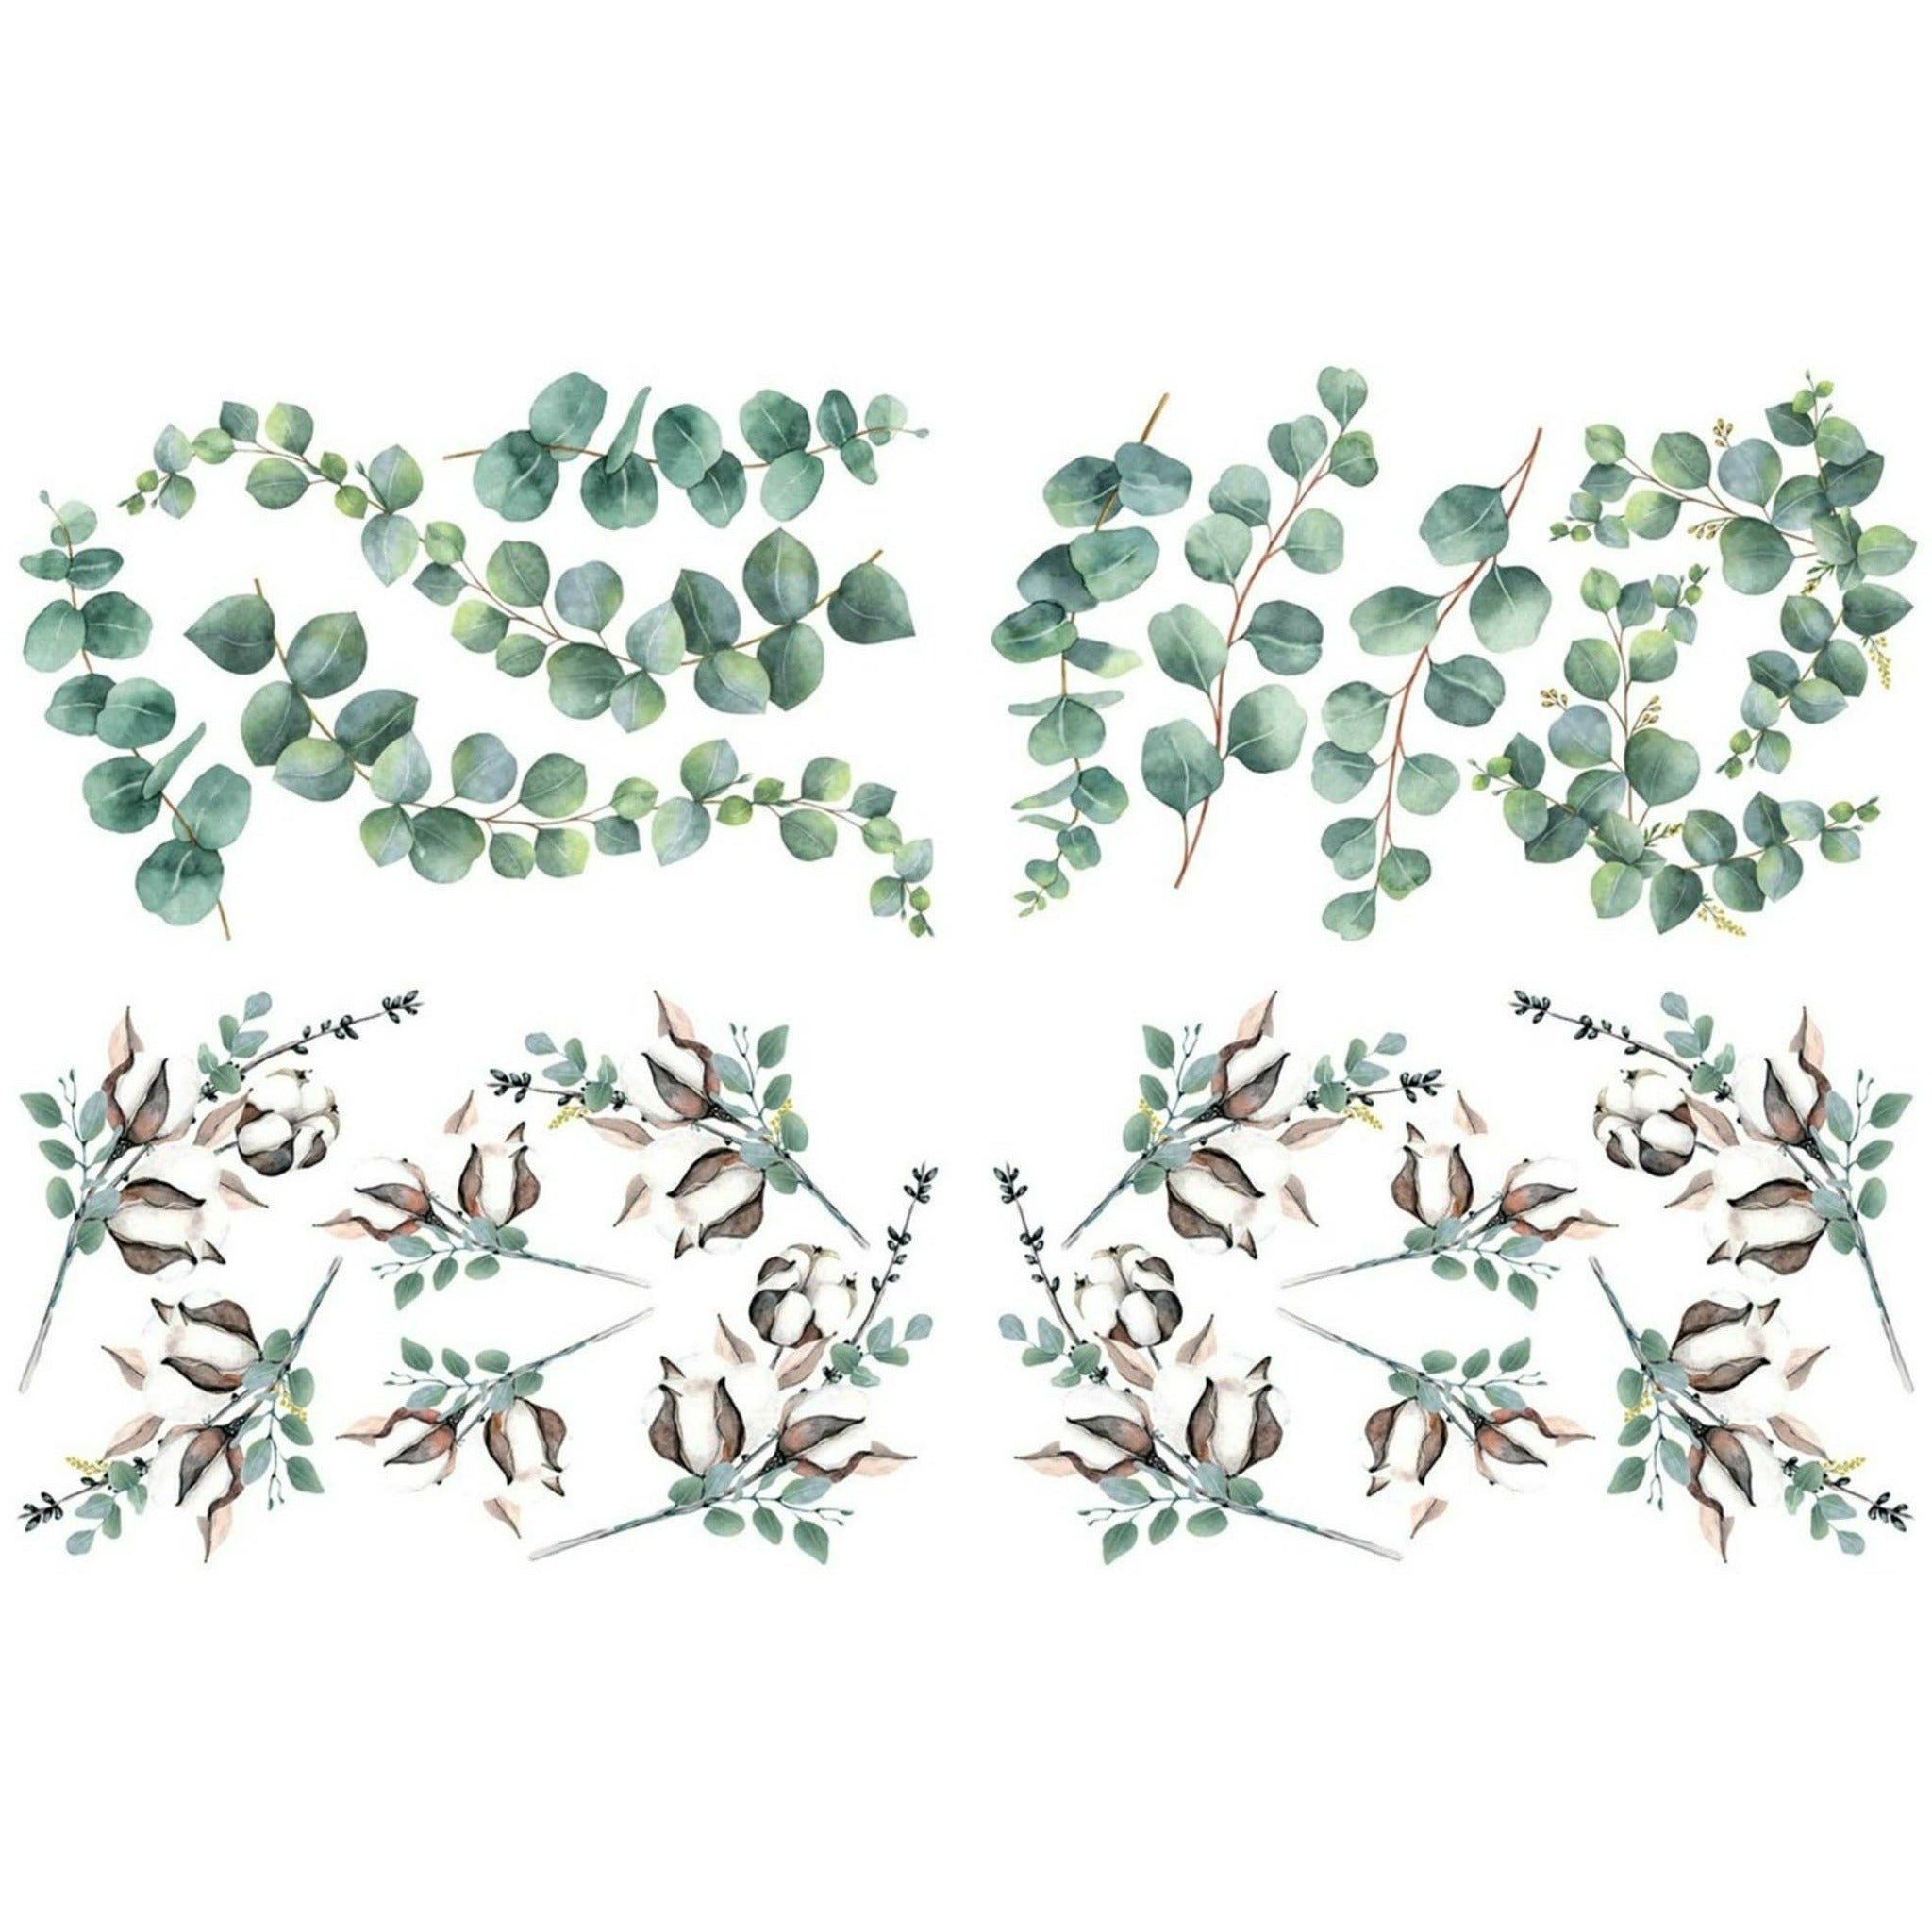 A rub-on transfer that features eucalyptus branches and cotton plant branches on a white background.